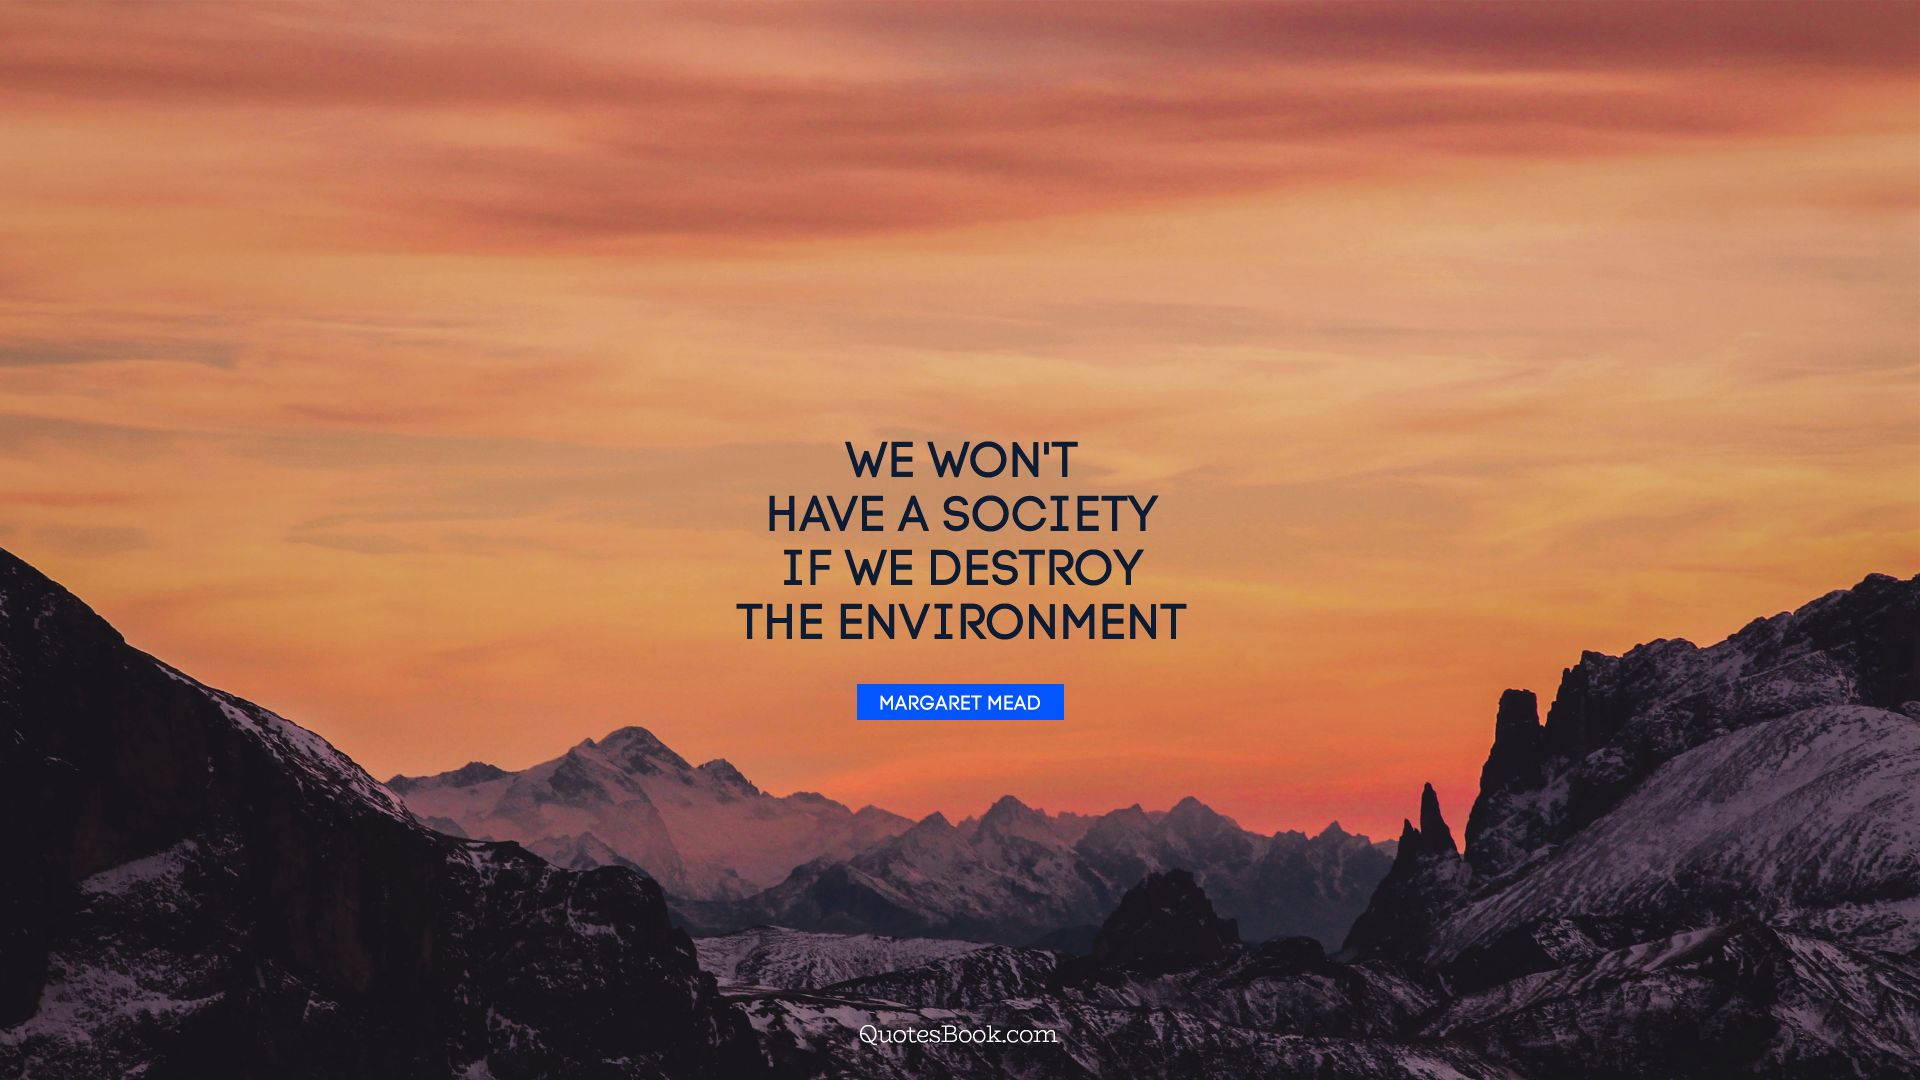 We won't have a society if we destroy the environment. - Quote by Margaret Mead